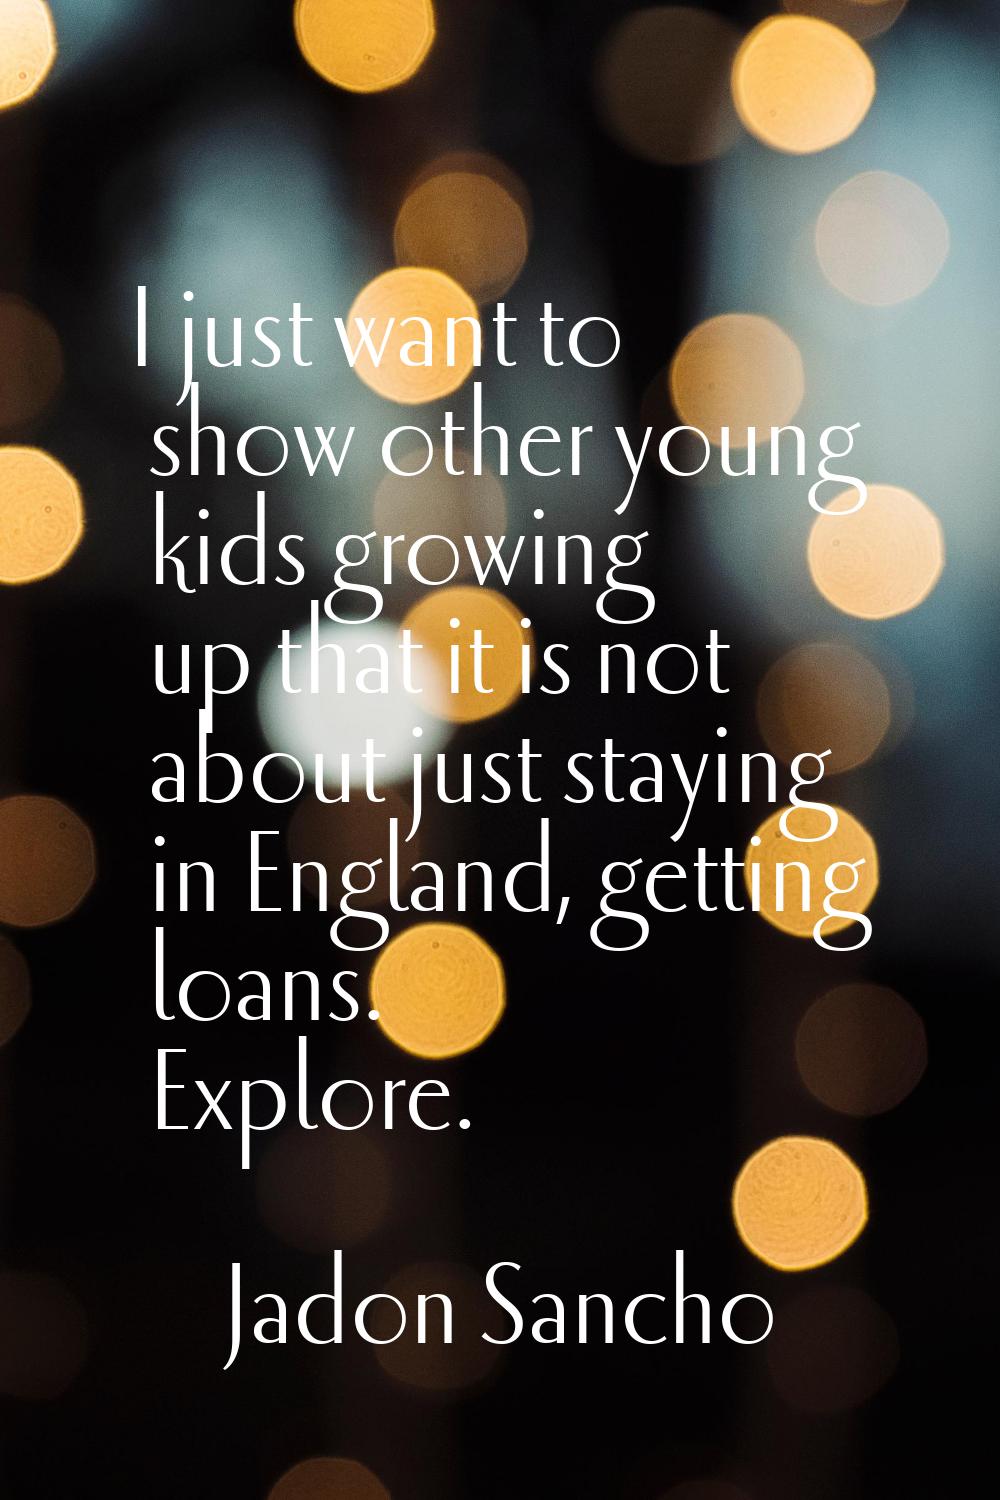 I just want to show other young kids growing up that it is not about just staying in England, getti